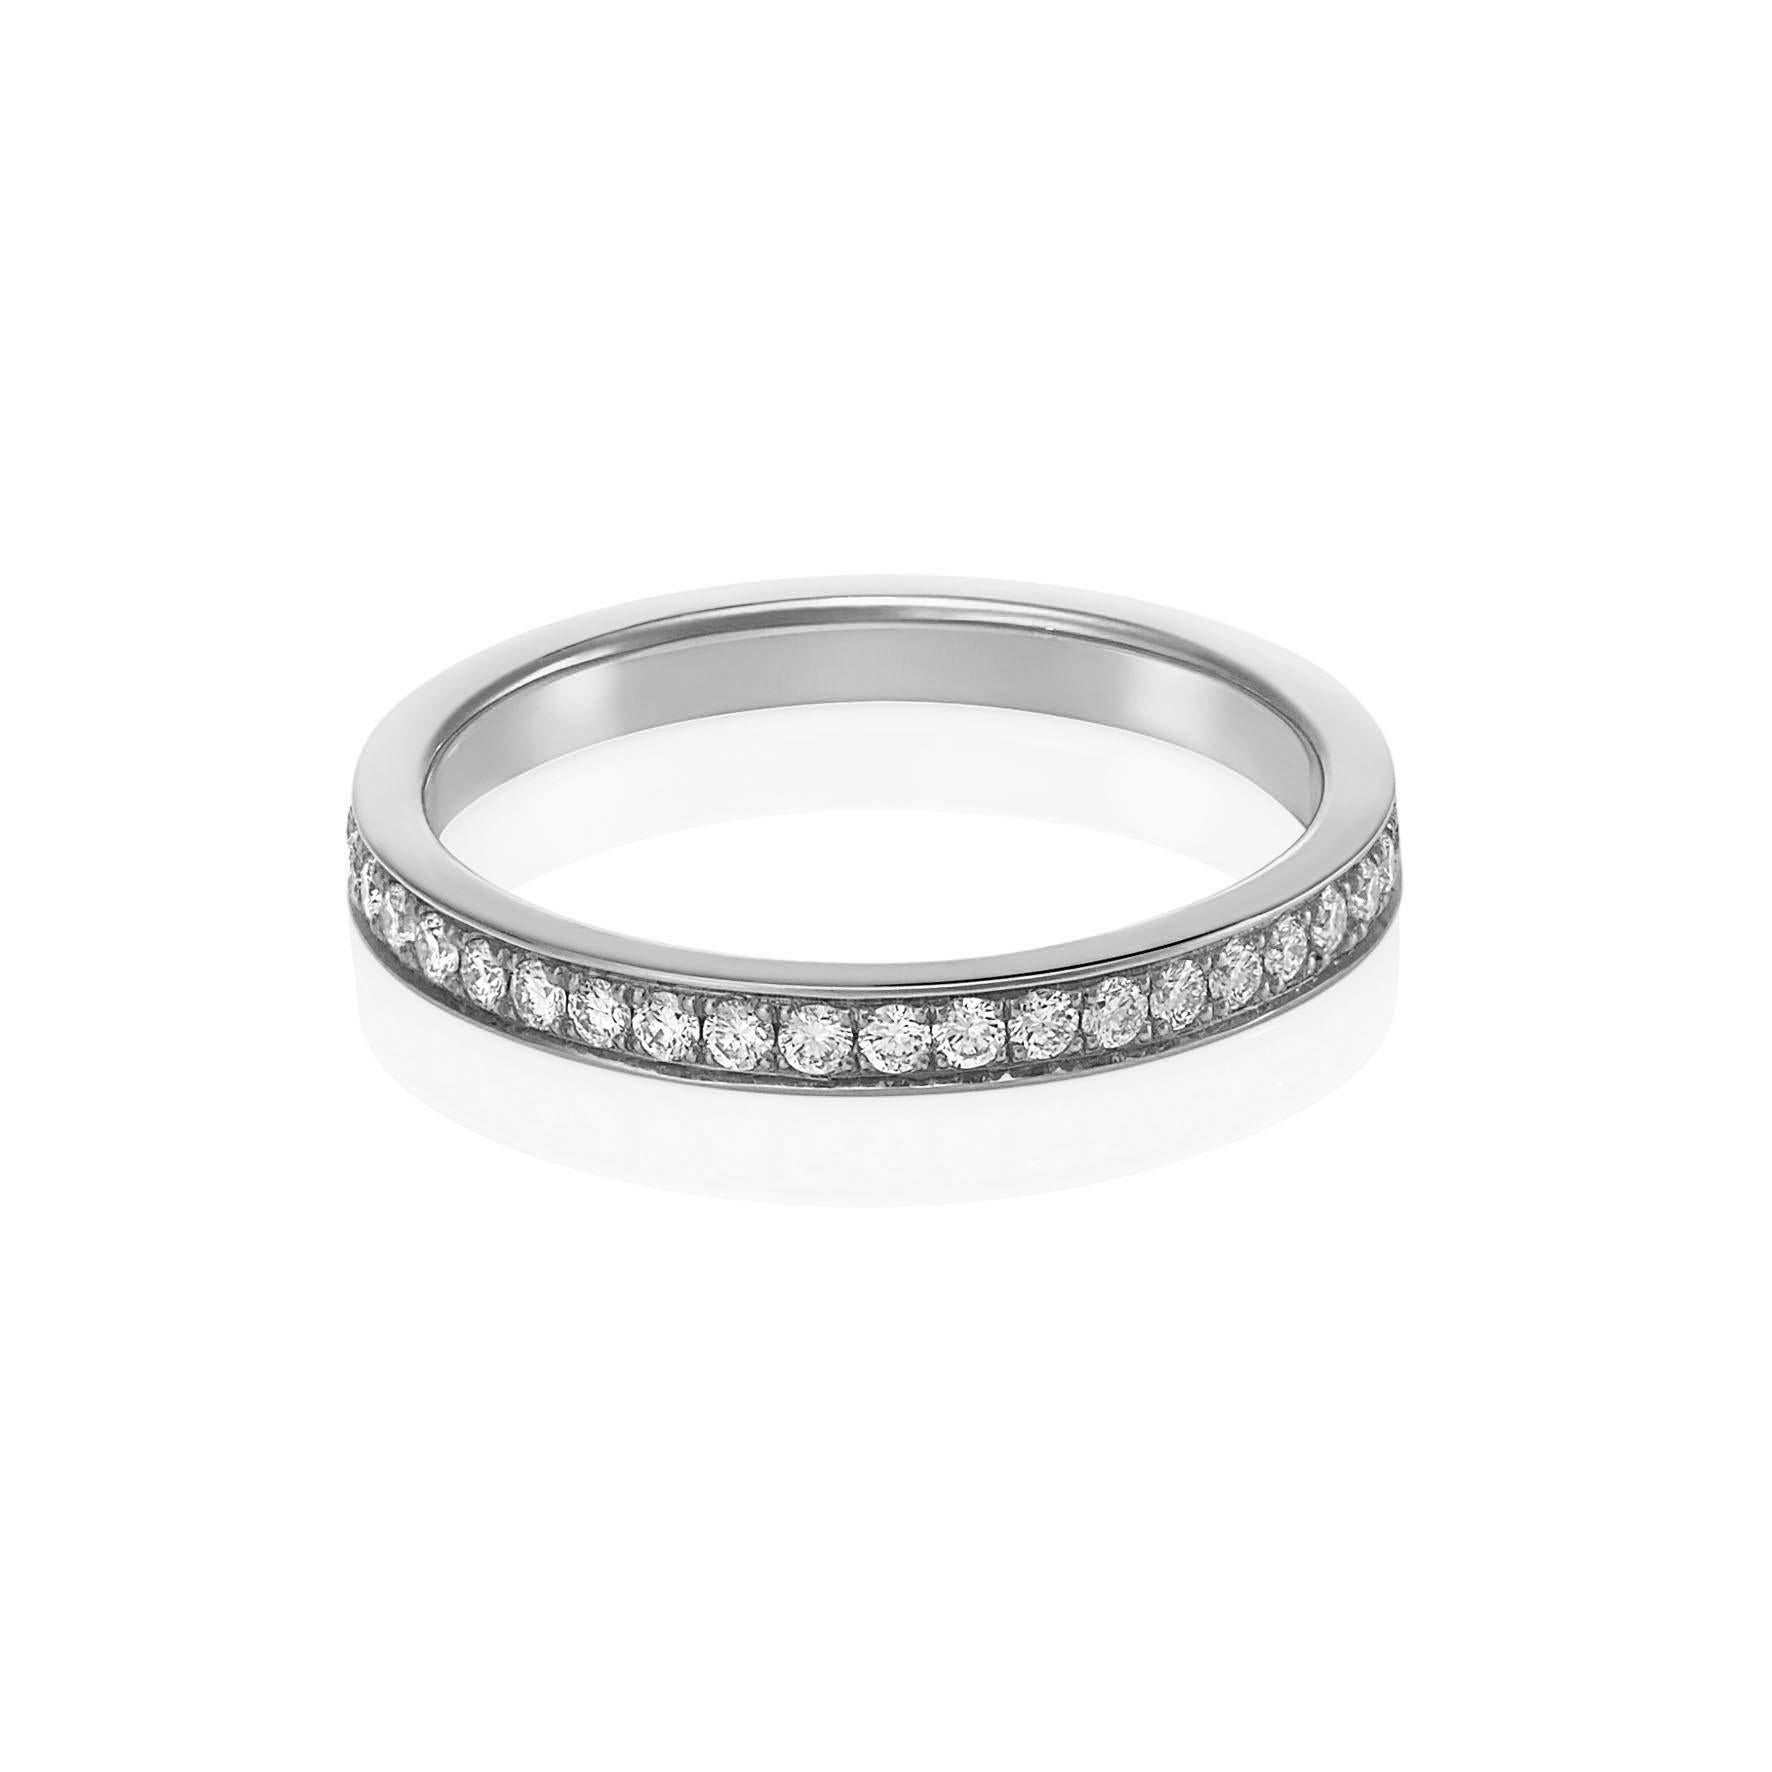 Giulians 18 karat white gold and white diamond pave set ring. This ring features 26 round brilliant cut white diamonds (E-F VS) pave set in a single line to two thirds around, with a total weight of 0.27ct.  The band measures 2.3mm in width and